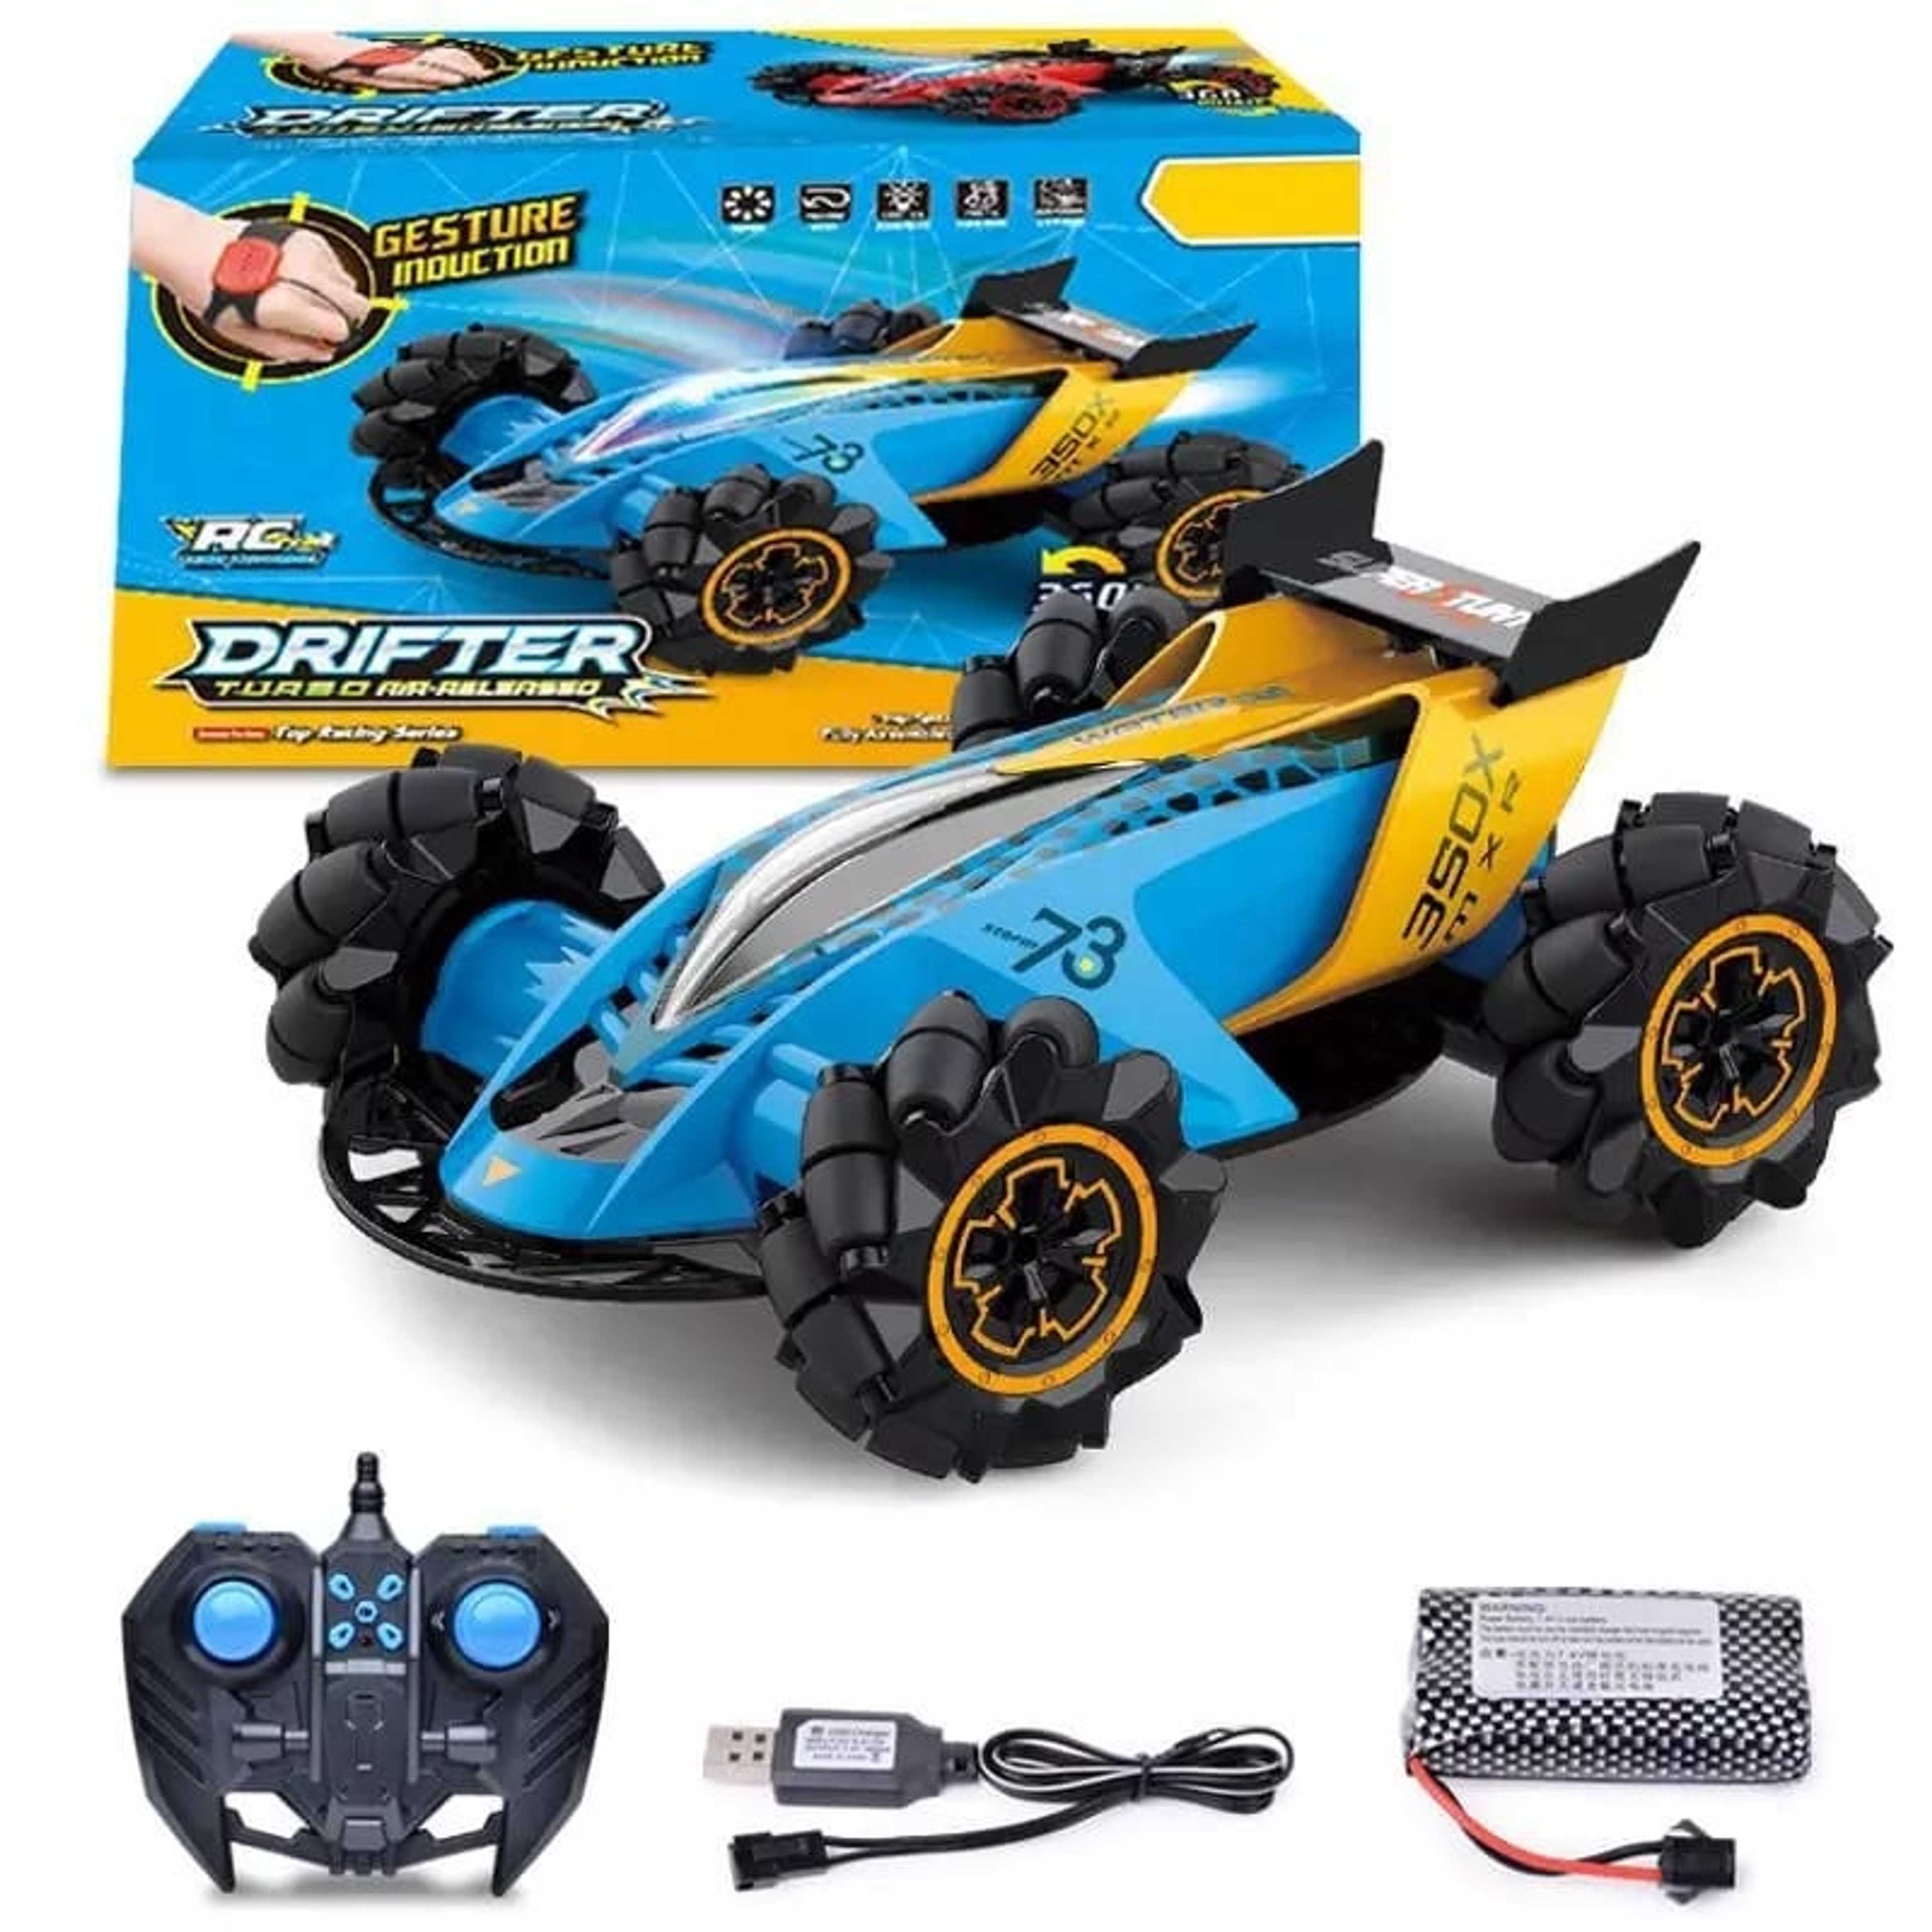 New Hand Control Car 360 Degree Rotation Drifter Turbo Air-Released Watch Remote Control Racing Car Toy For Kids